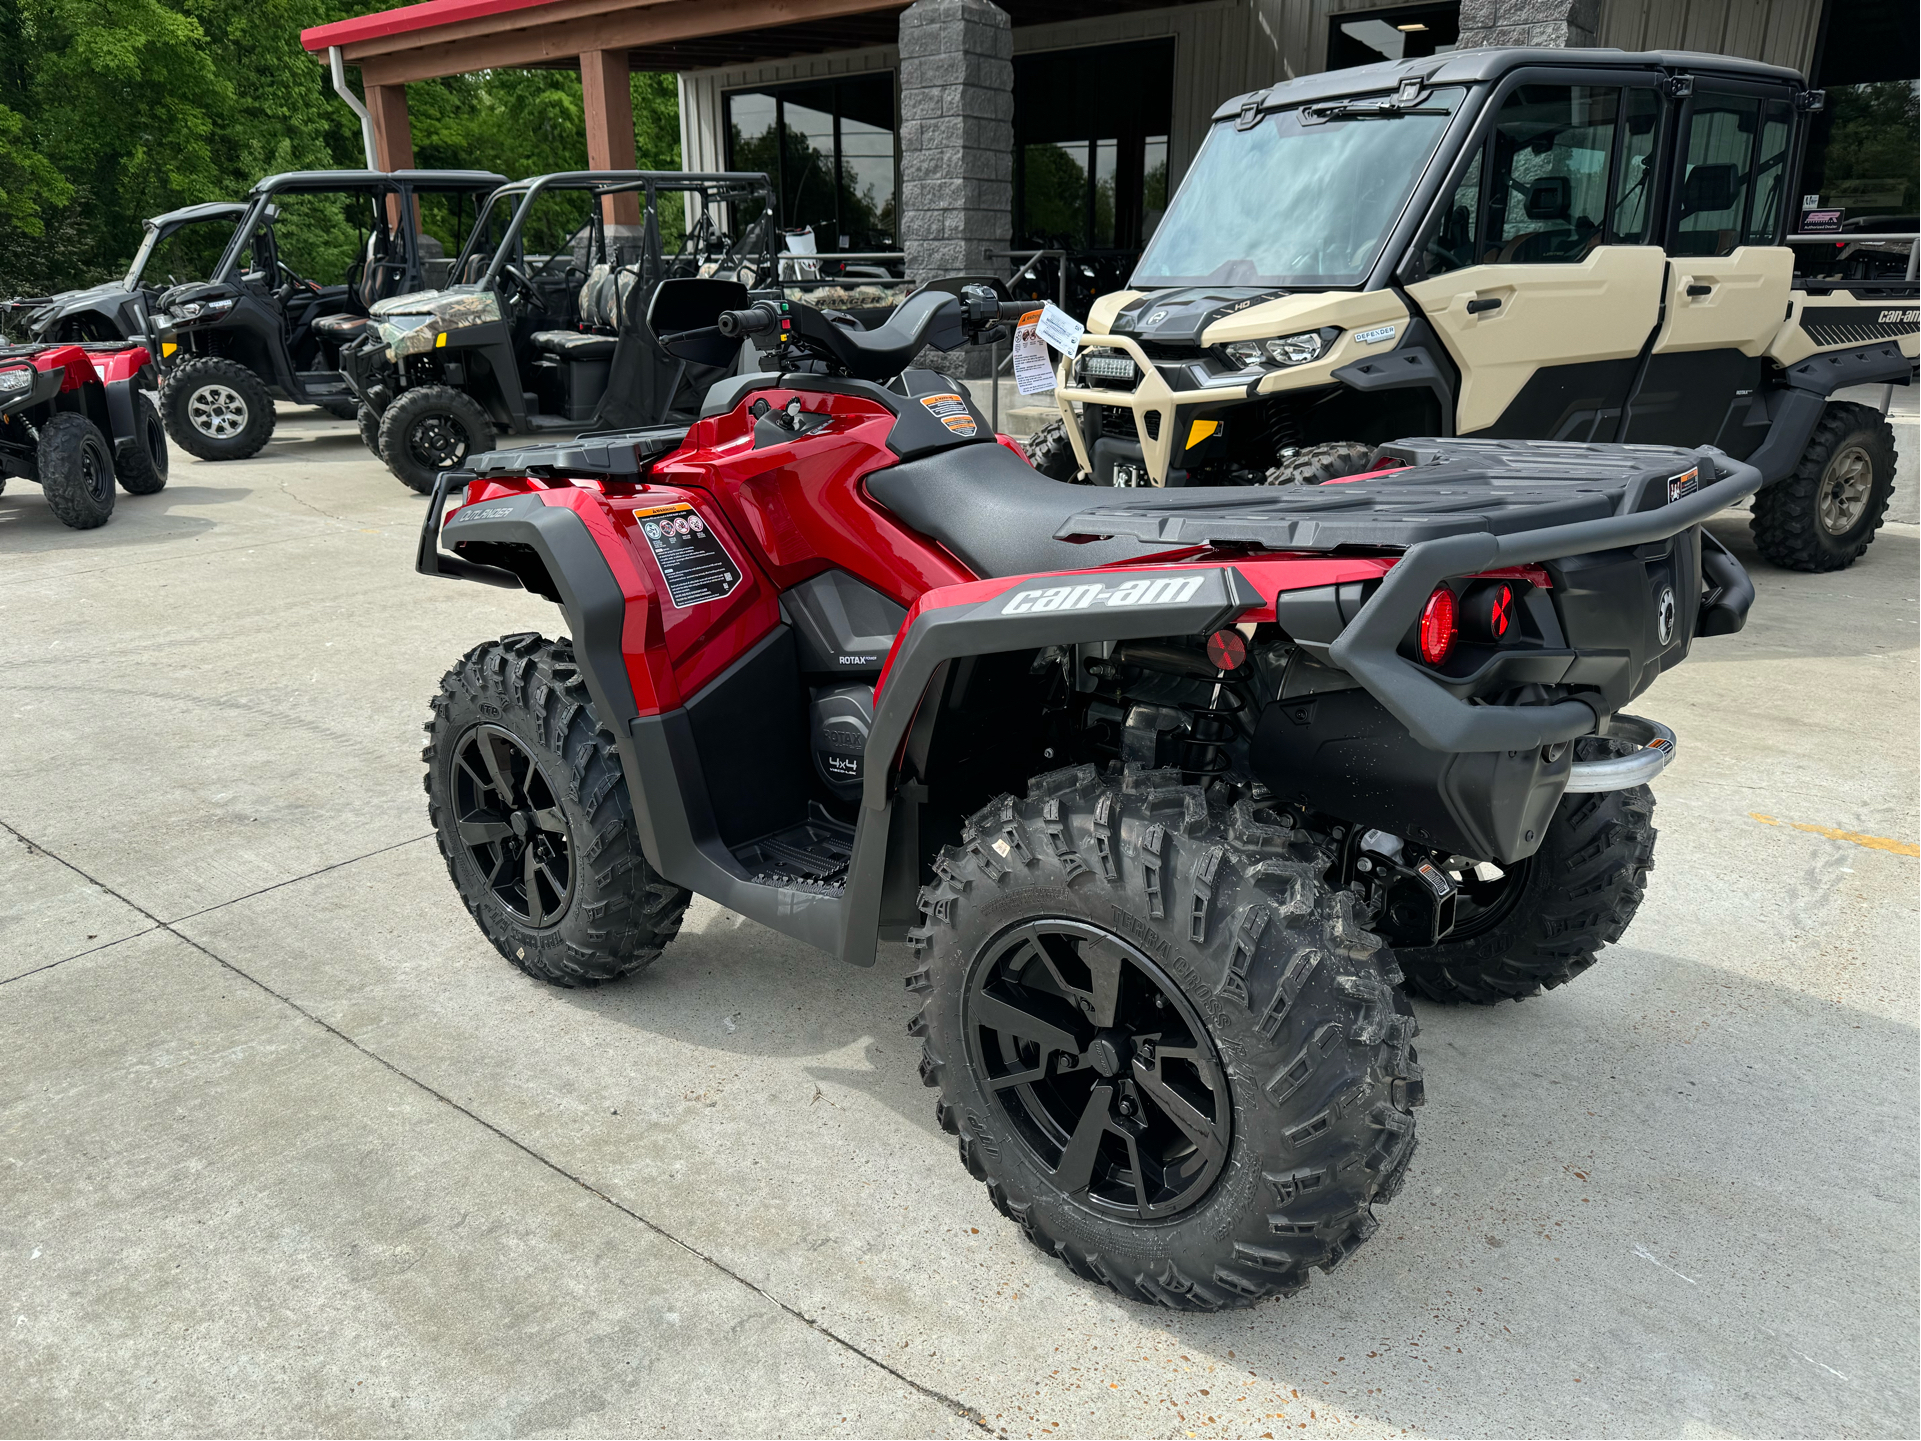 2024 Can-Am Outlander XT 1000R in Leland, Mississippi - Photo 2